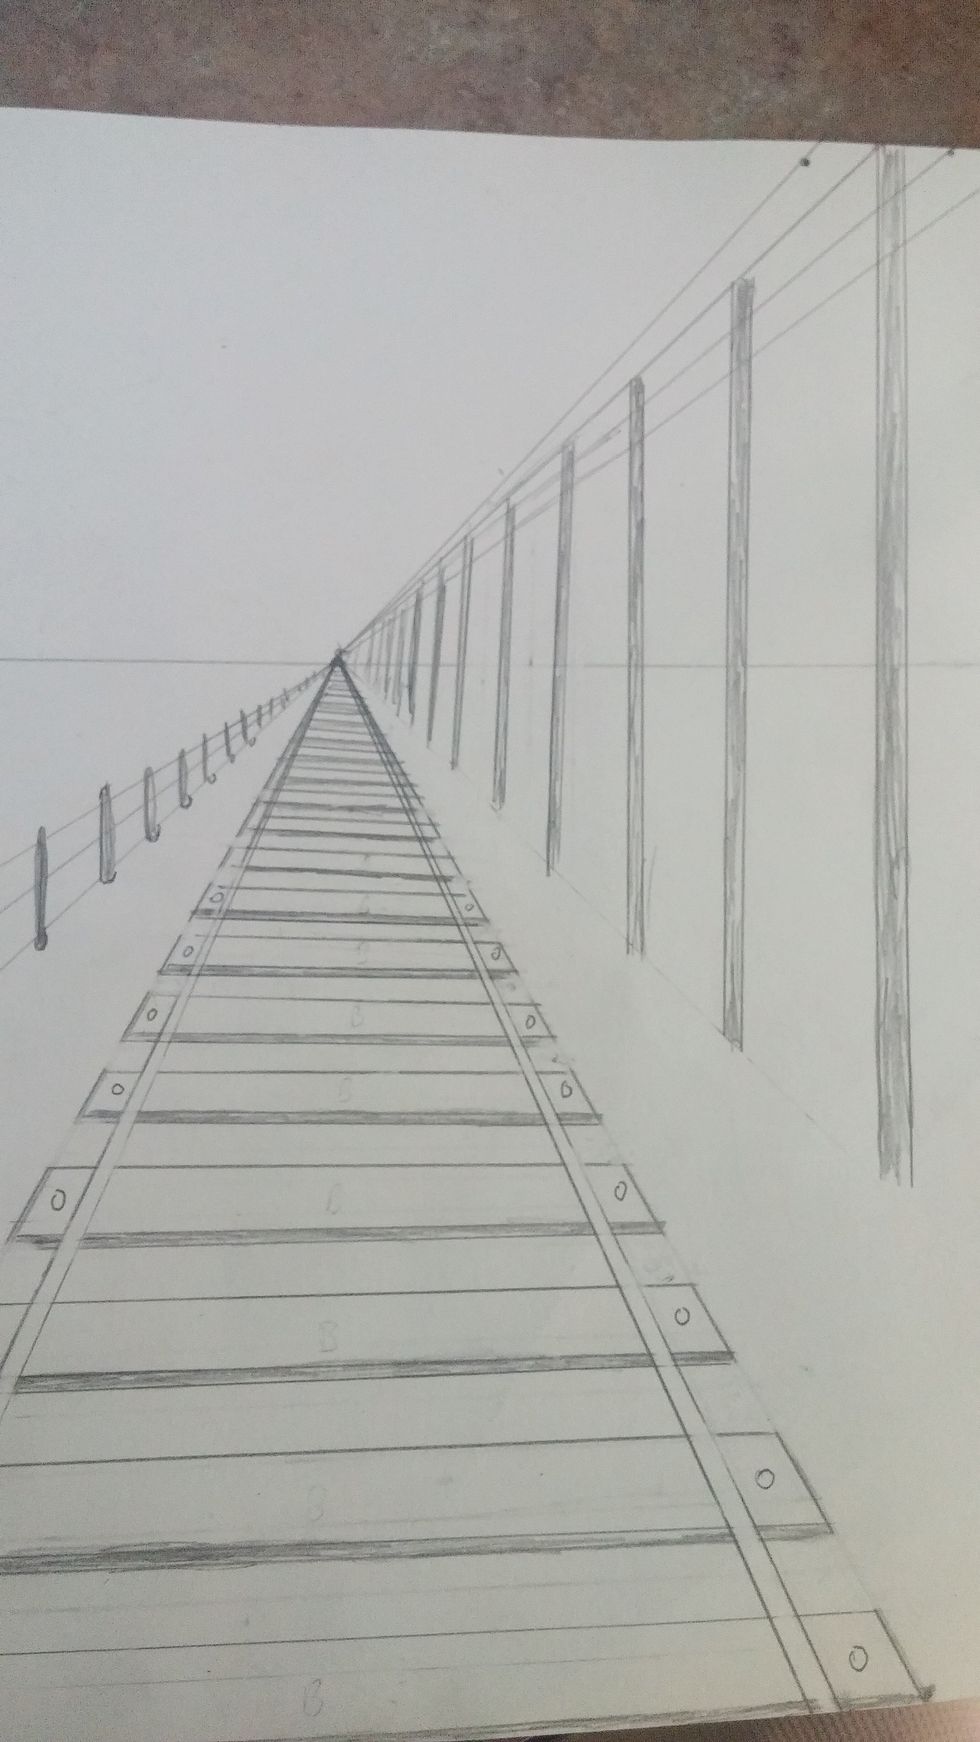 How to draw a 1-point perspective railroad - B+C Guides